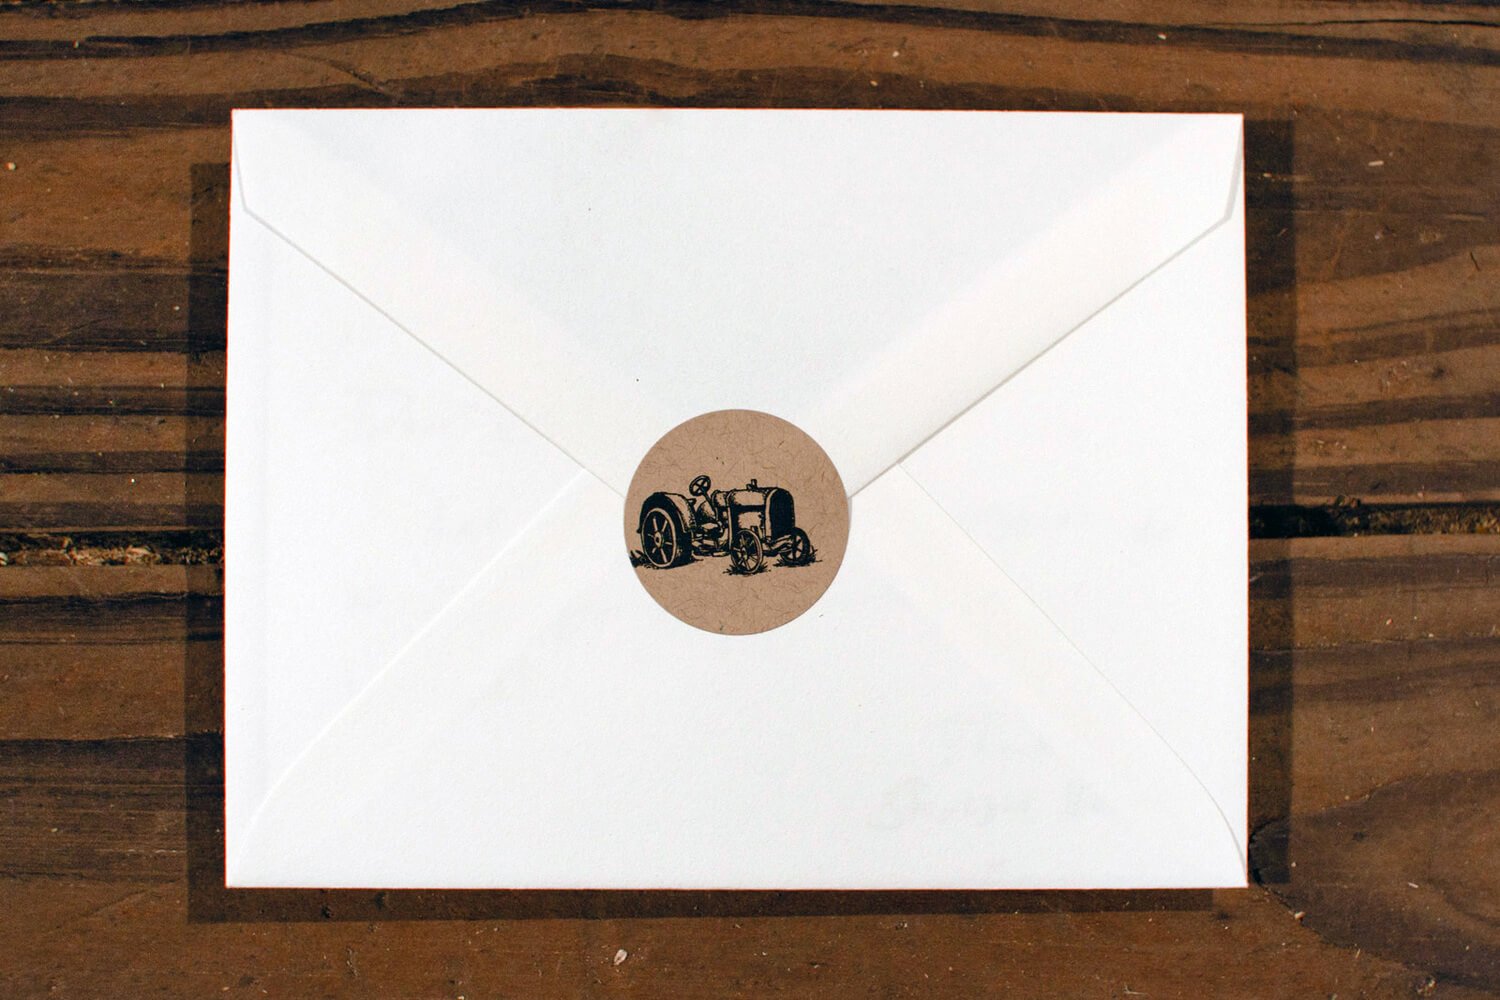 Tractor illustration is a kraft paper sticker on the back of the envelope